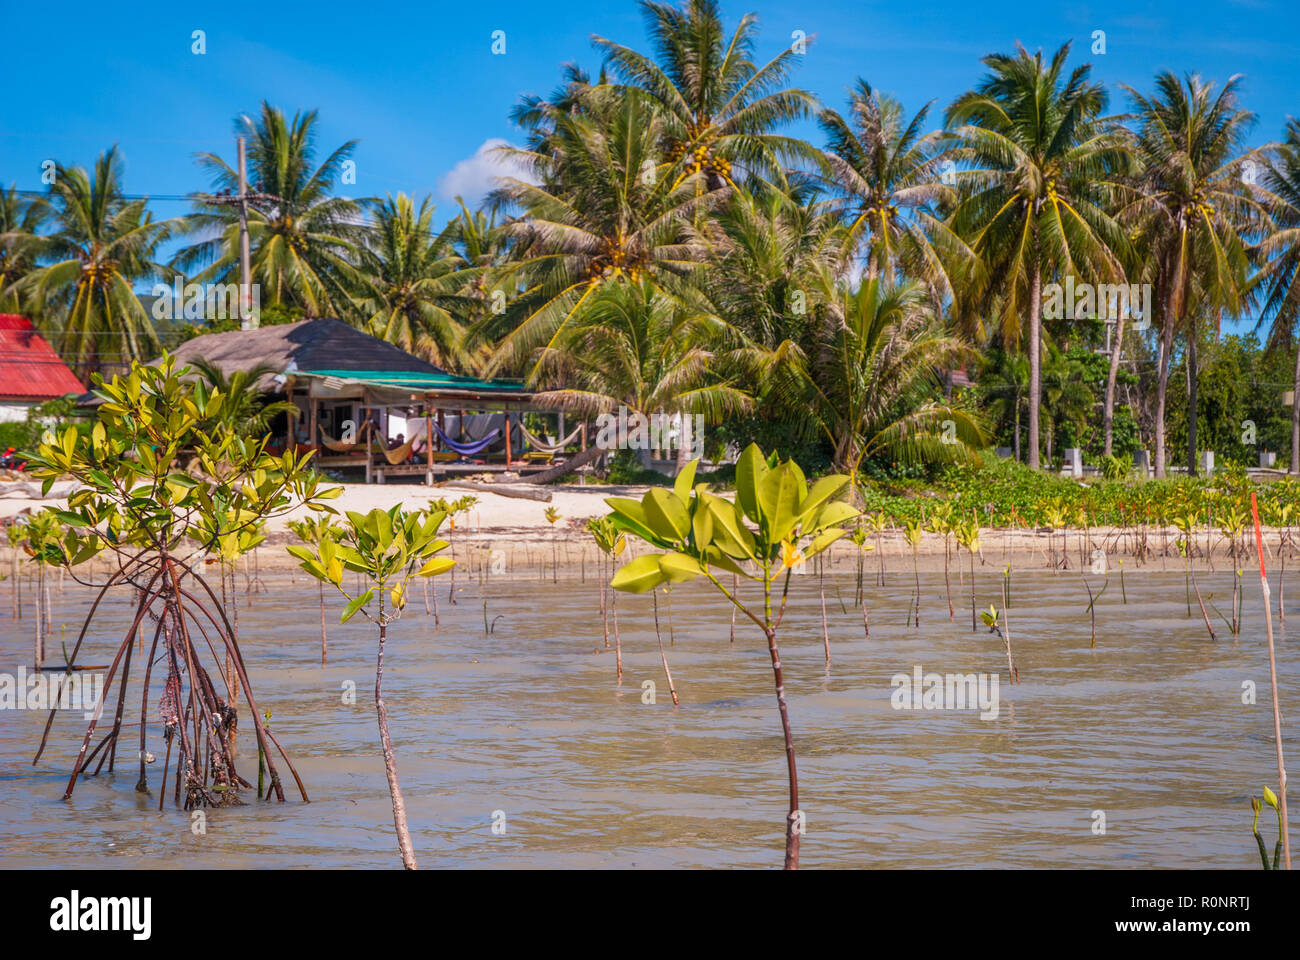 Mangrove plants growing at the coast in low tide, Koh Phangan, Thailand Stock Photo